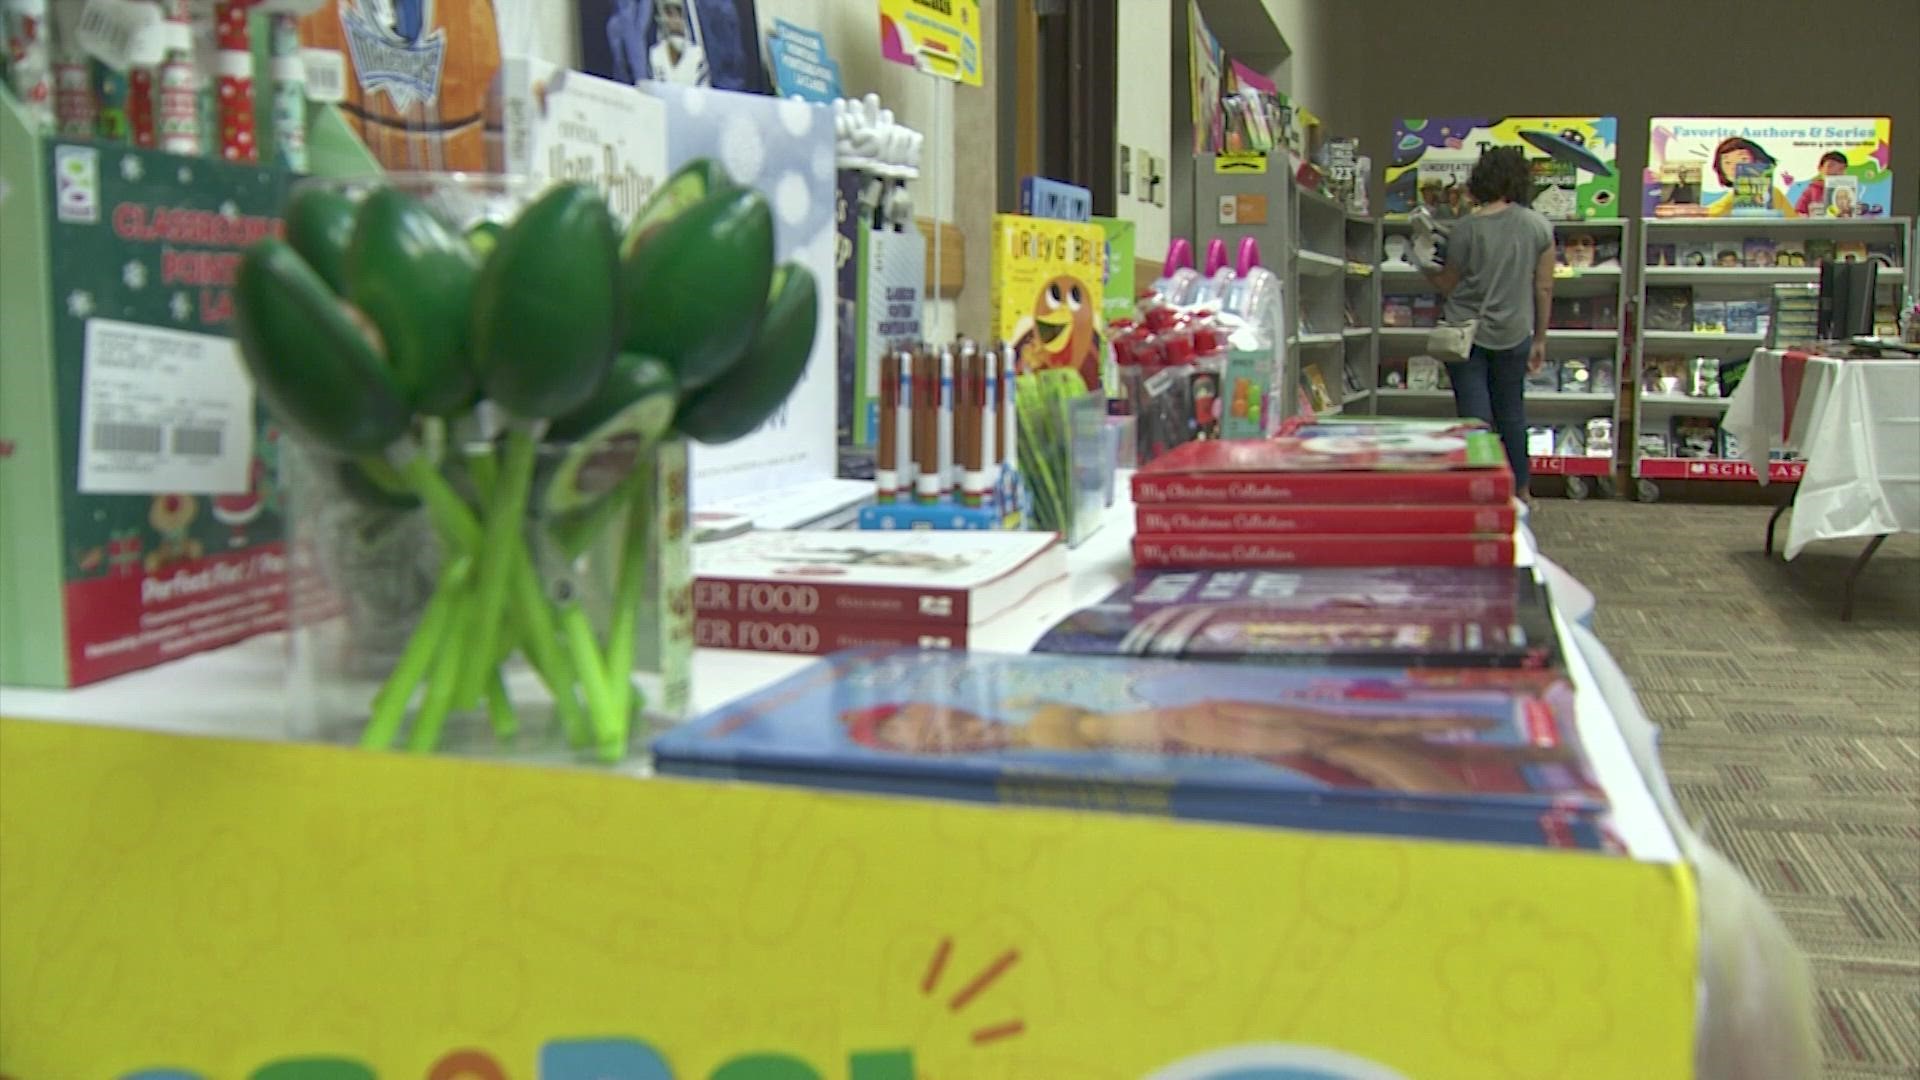 Kristine Leathers got help from volunteers putting together the first-ever parent book fair in the GCISD area.